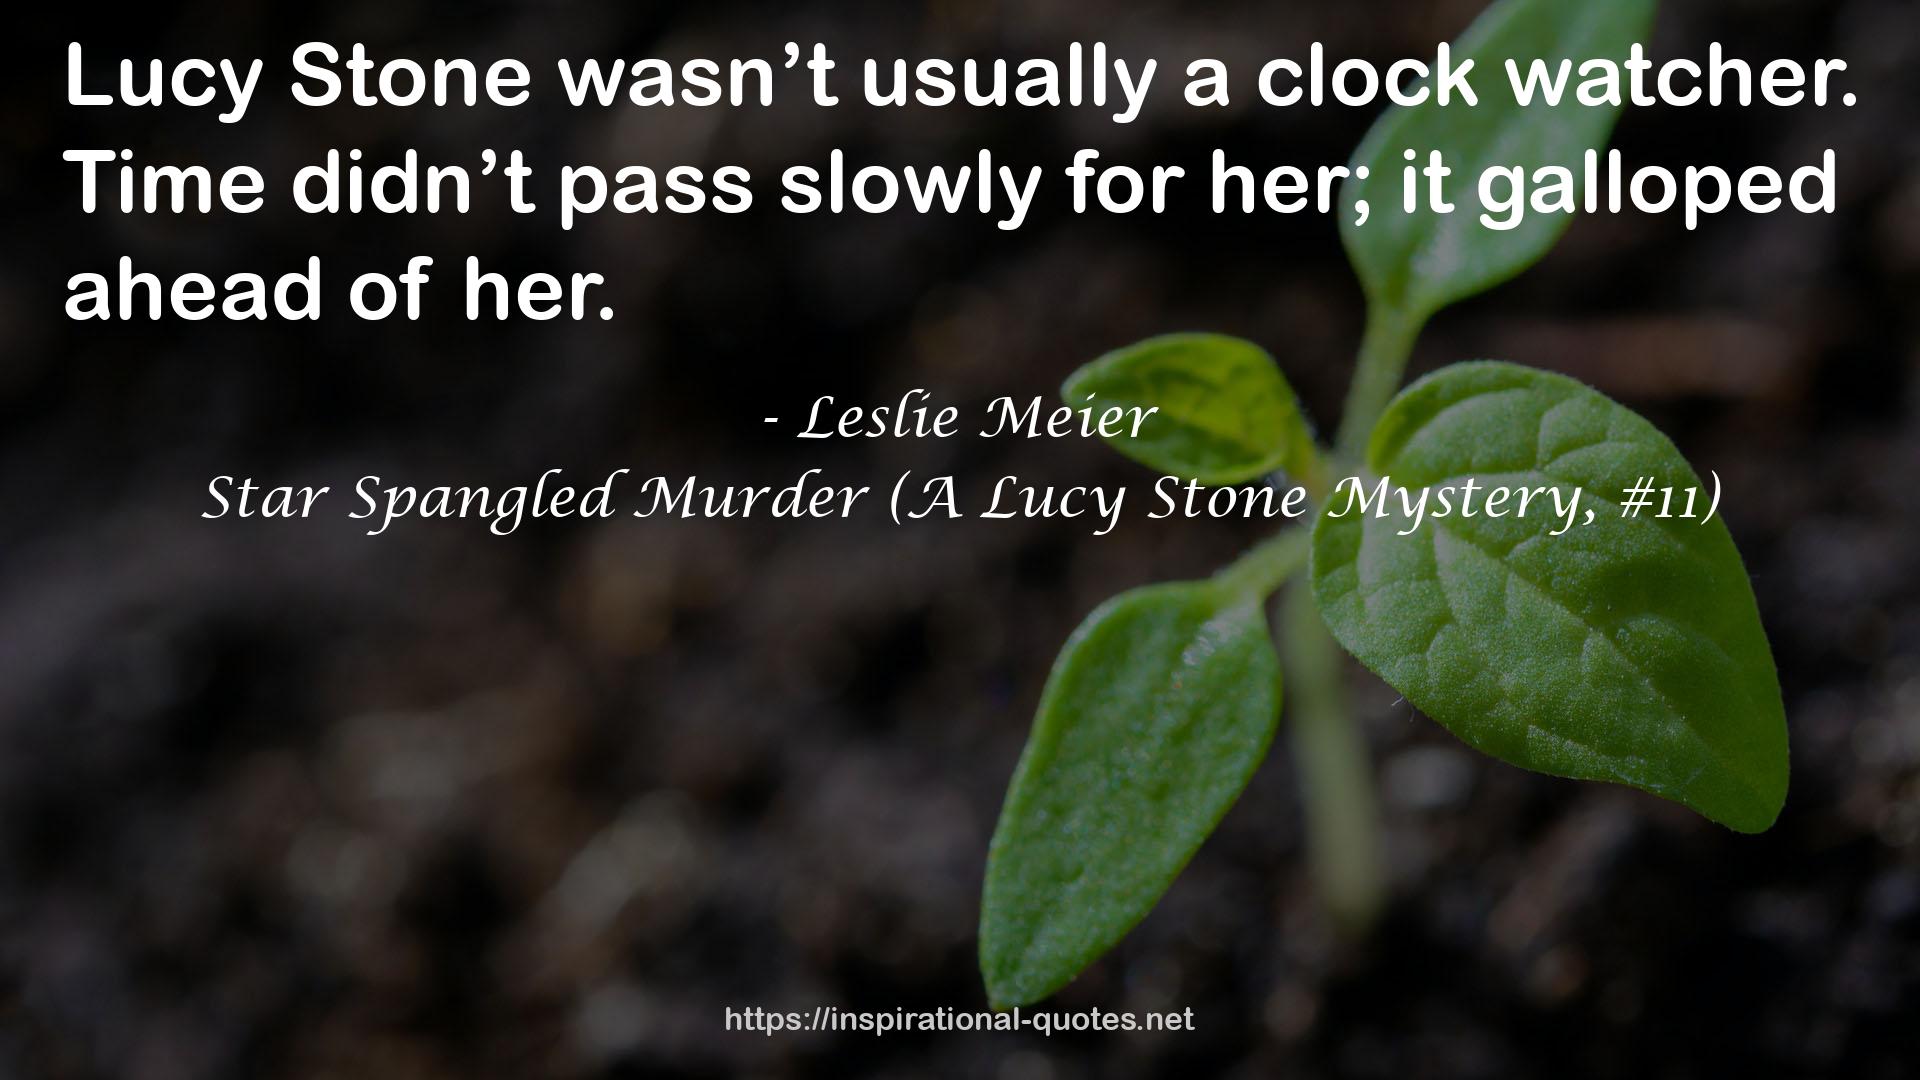 Star Spangled Murder (A Lucy Stone Mystery, #11) QUOTES